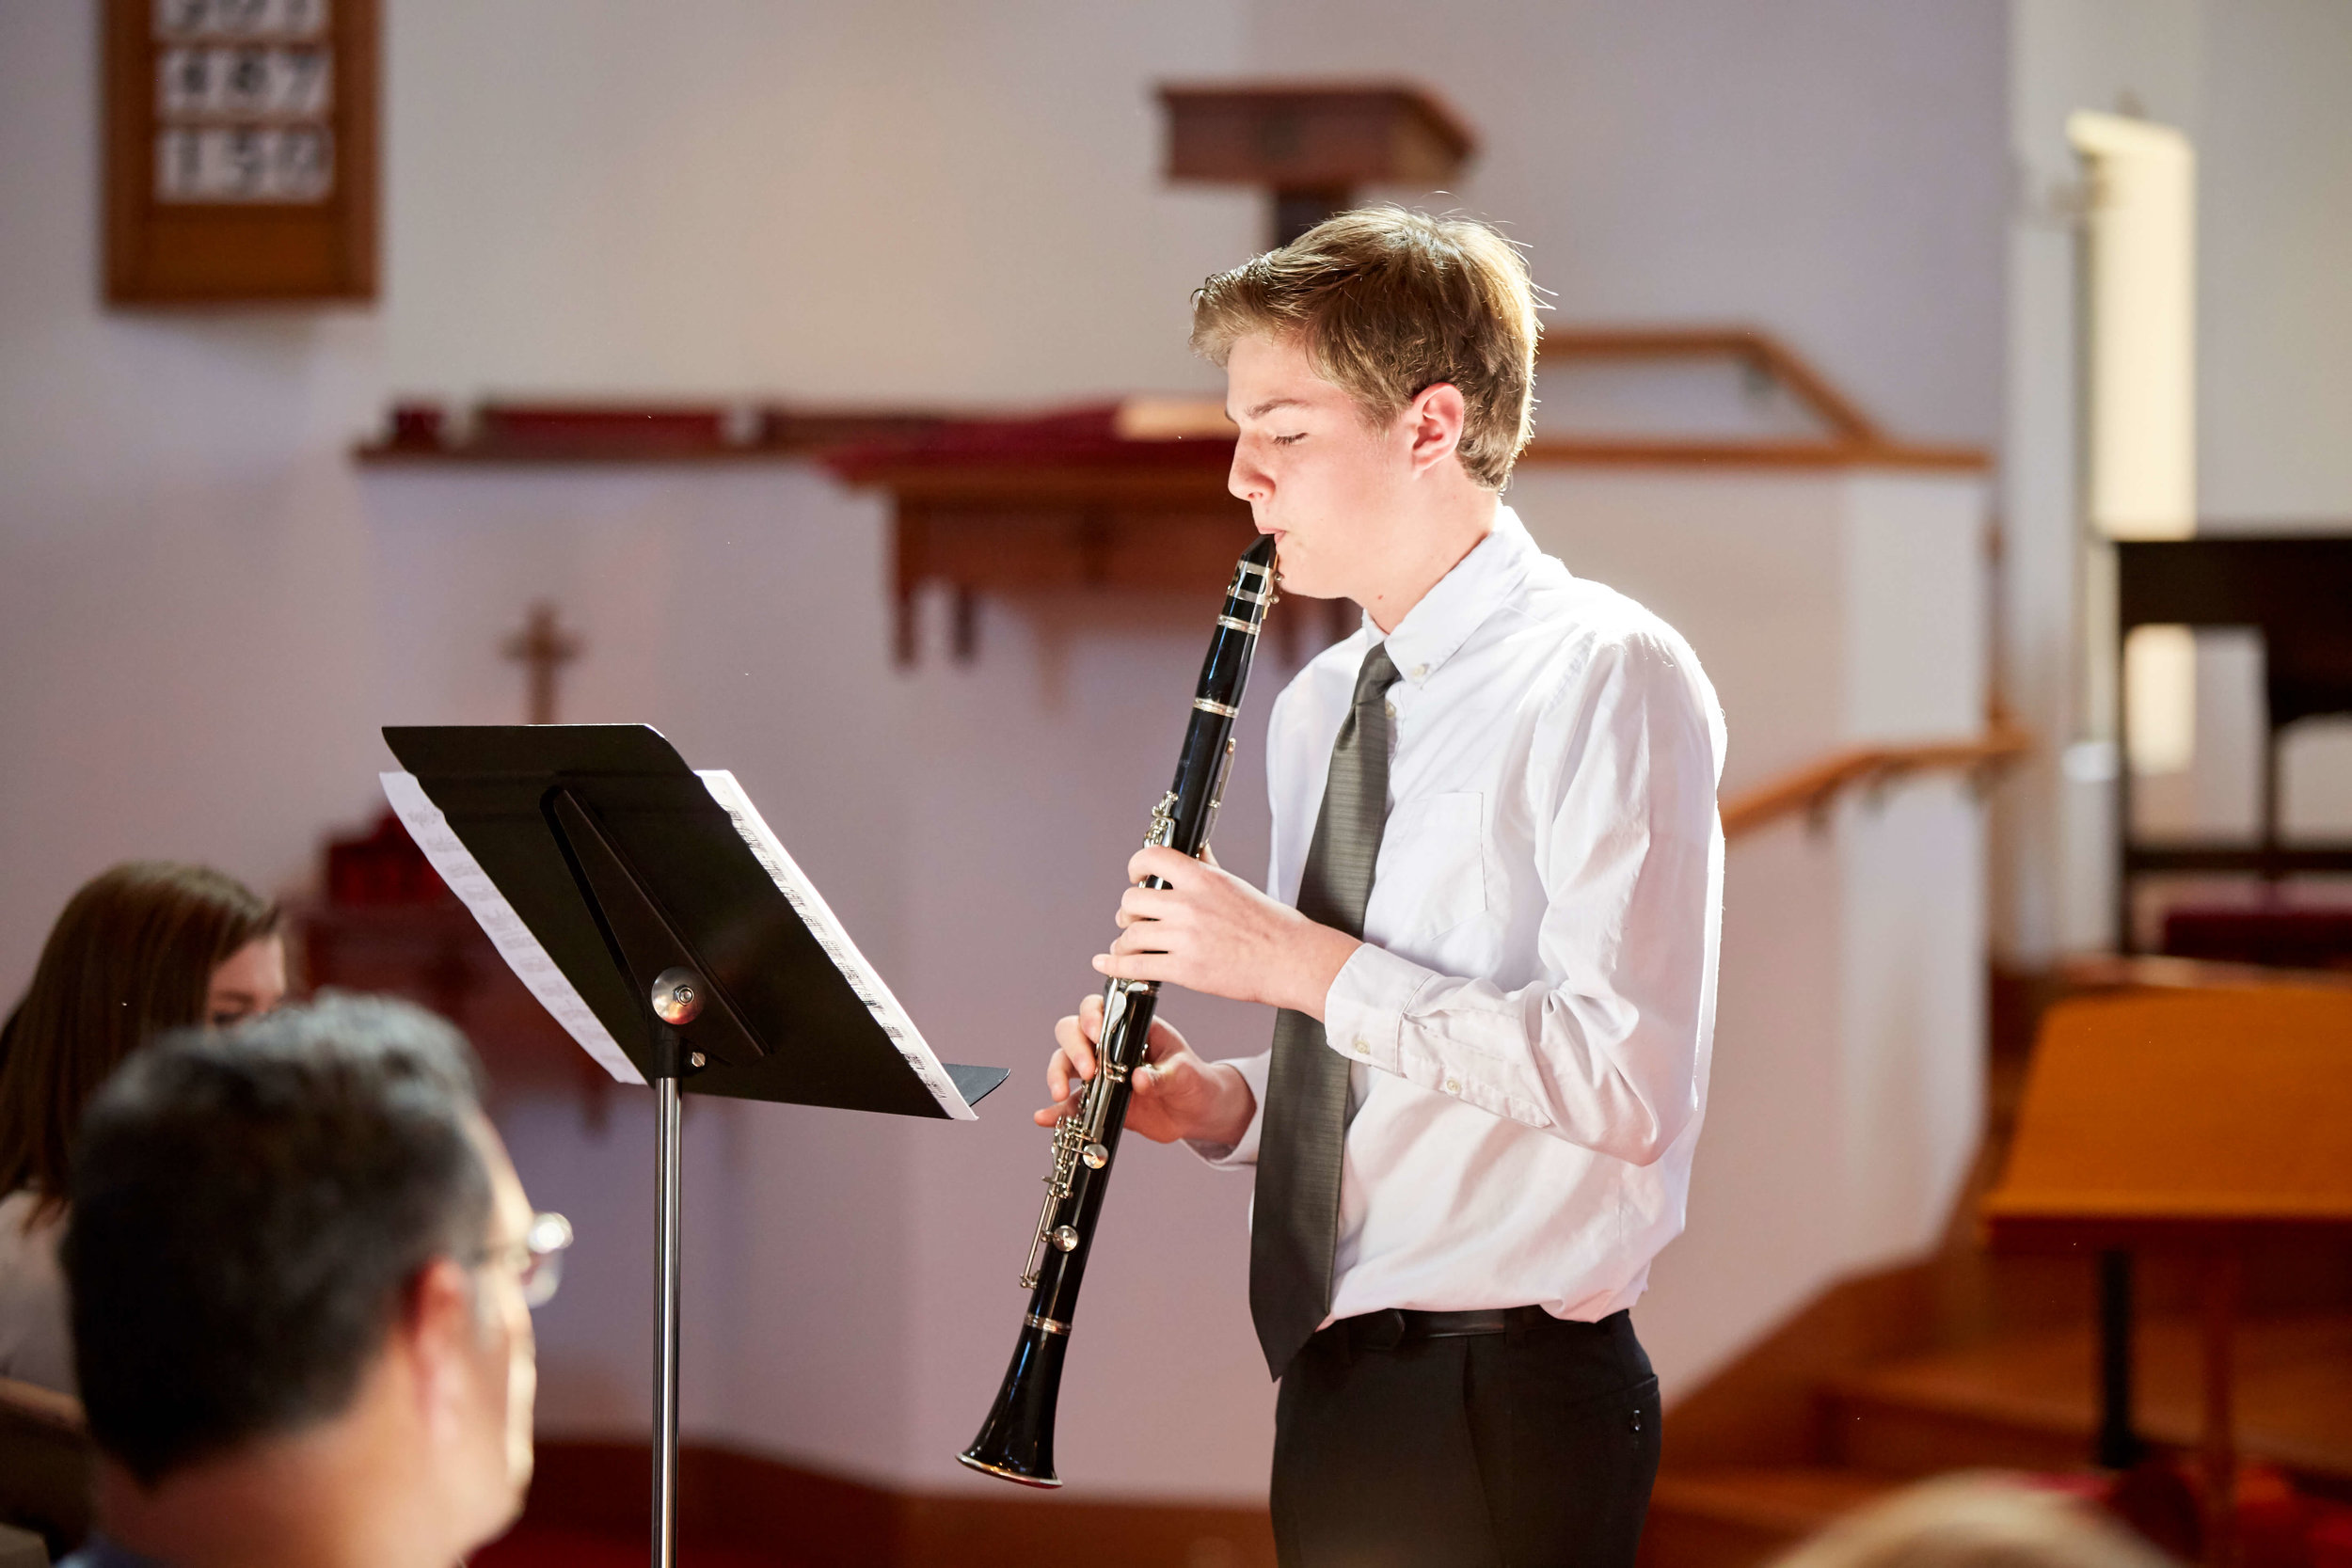   FLUTE &amp; CLARINET LESSONS IN CINCINNATI &amp; MASON   for beginner, intermediate, and advanced students  CALL  513-560-9175  TODAY TO SCHEDULE YOUR FIRST LESSON   Request Info  